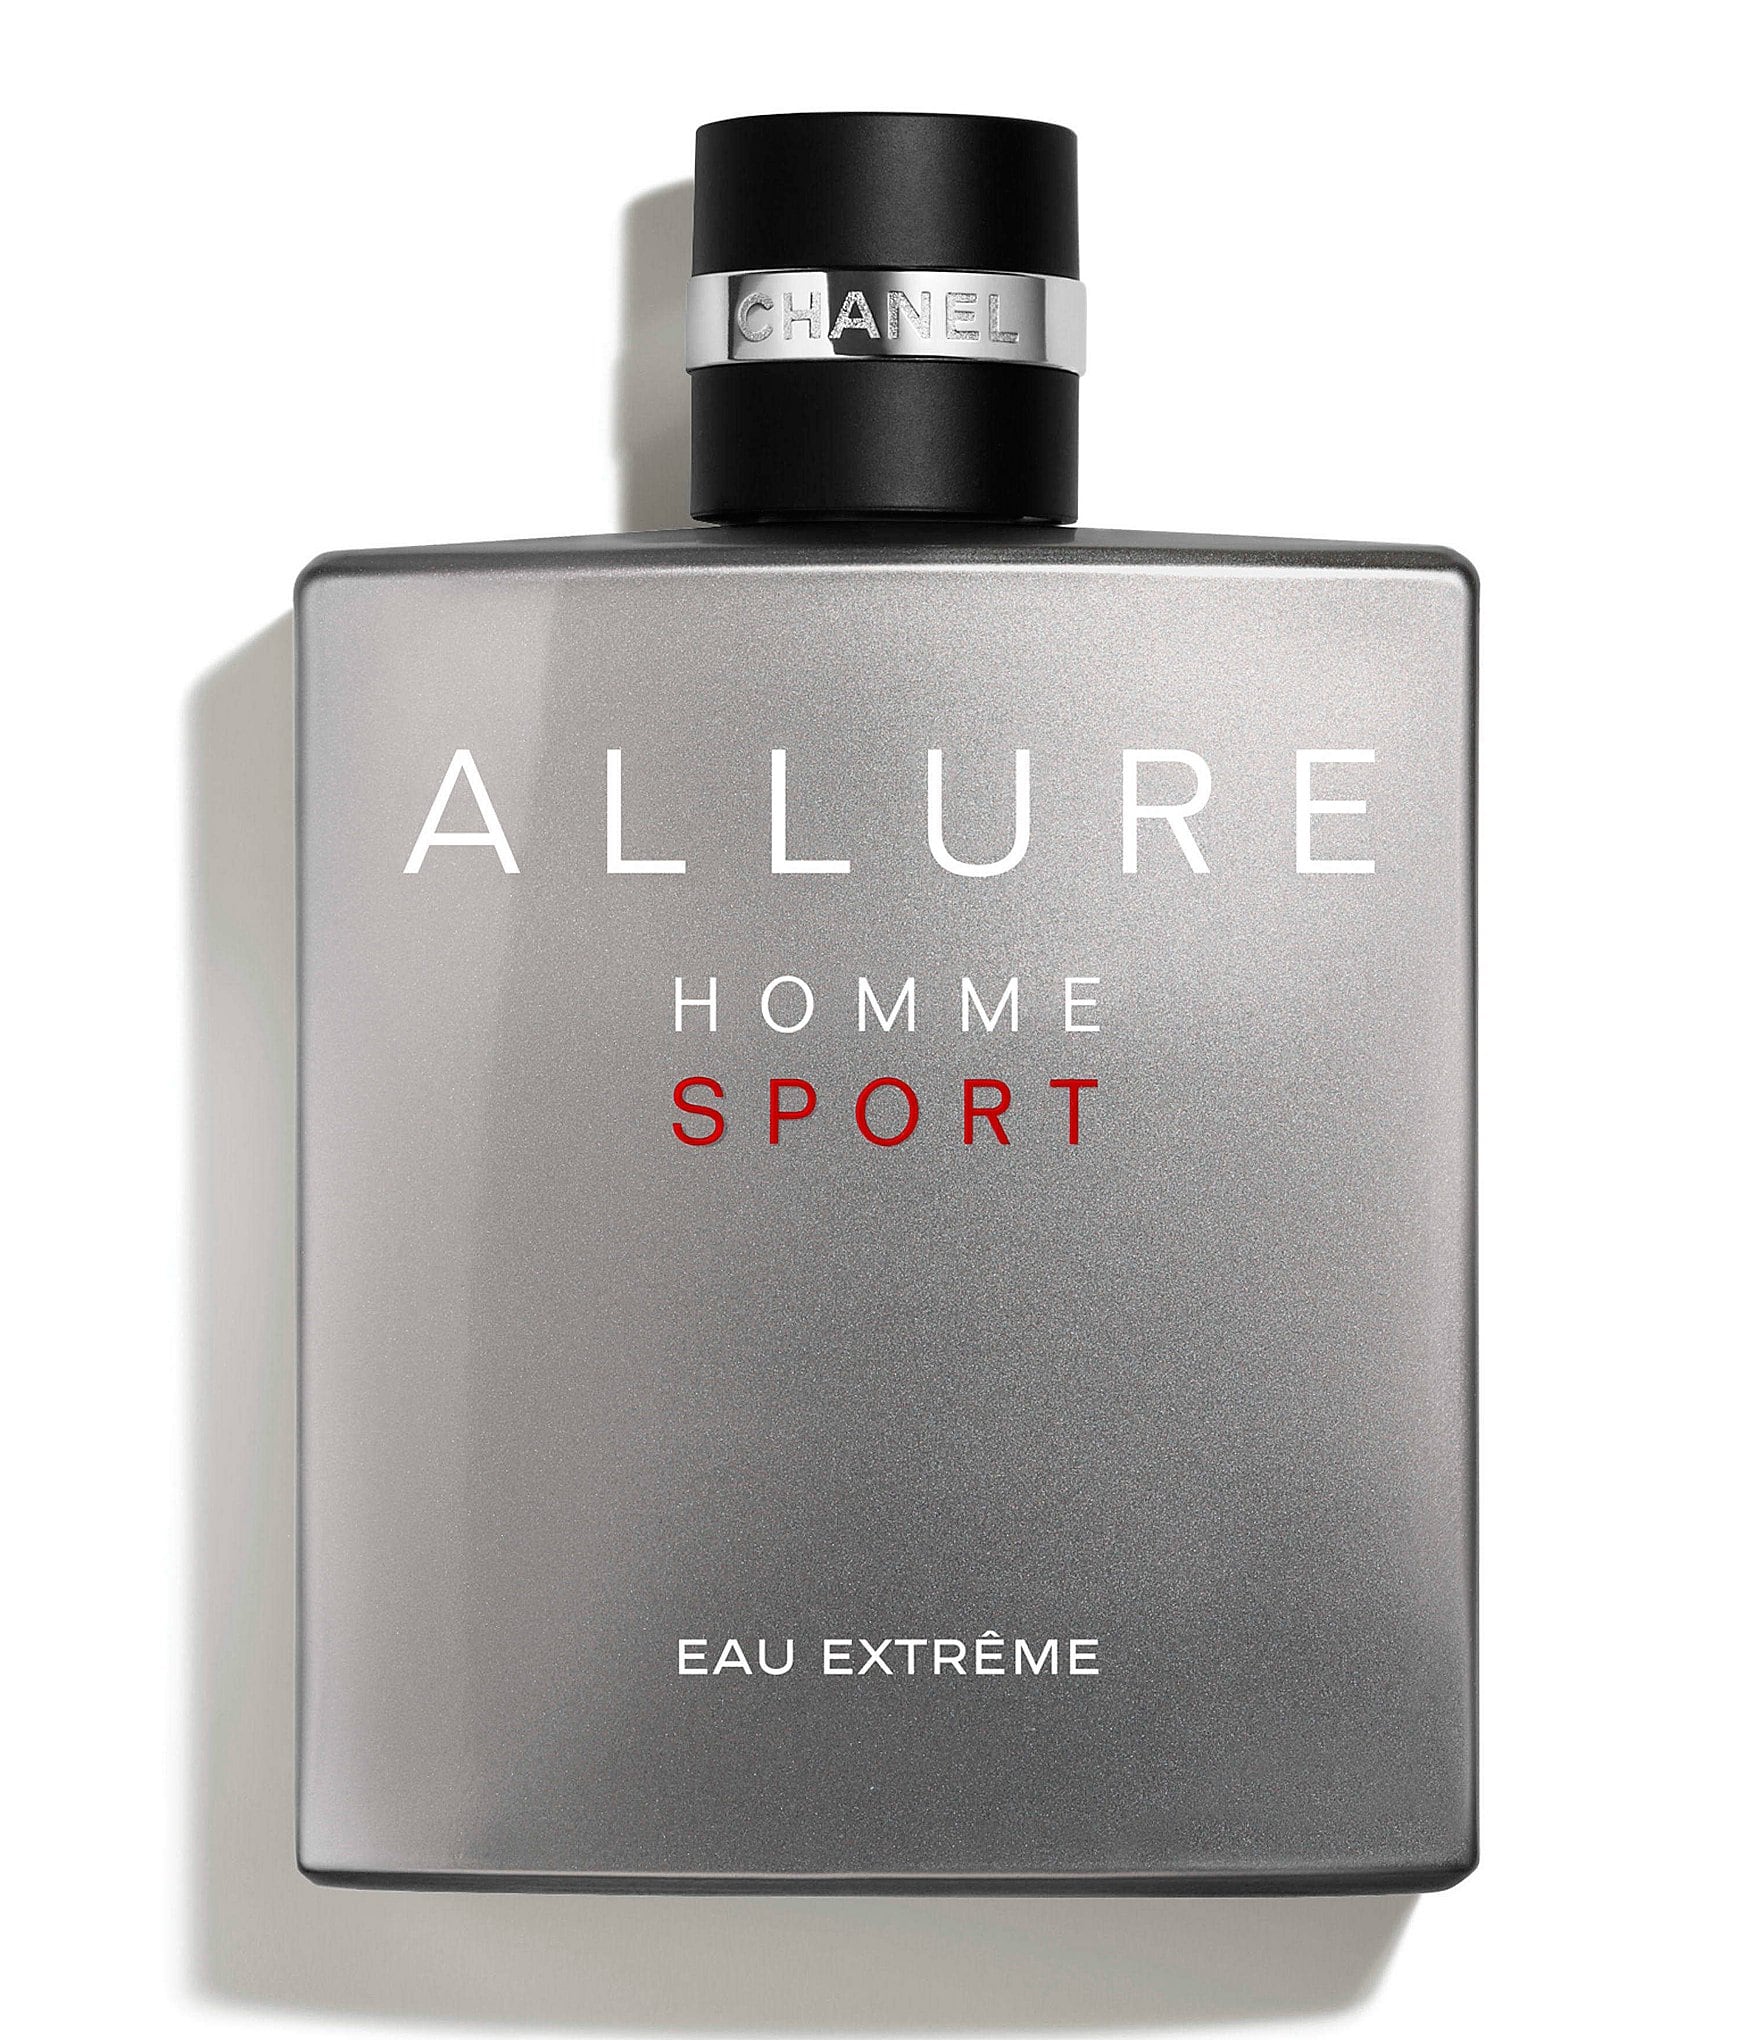 allure chanel sport homme